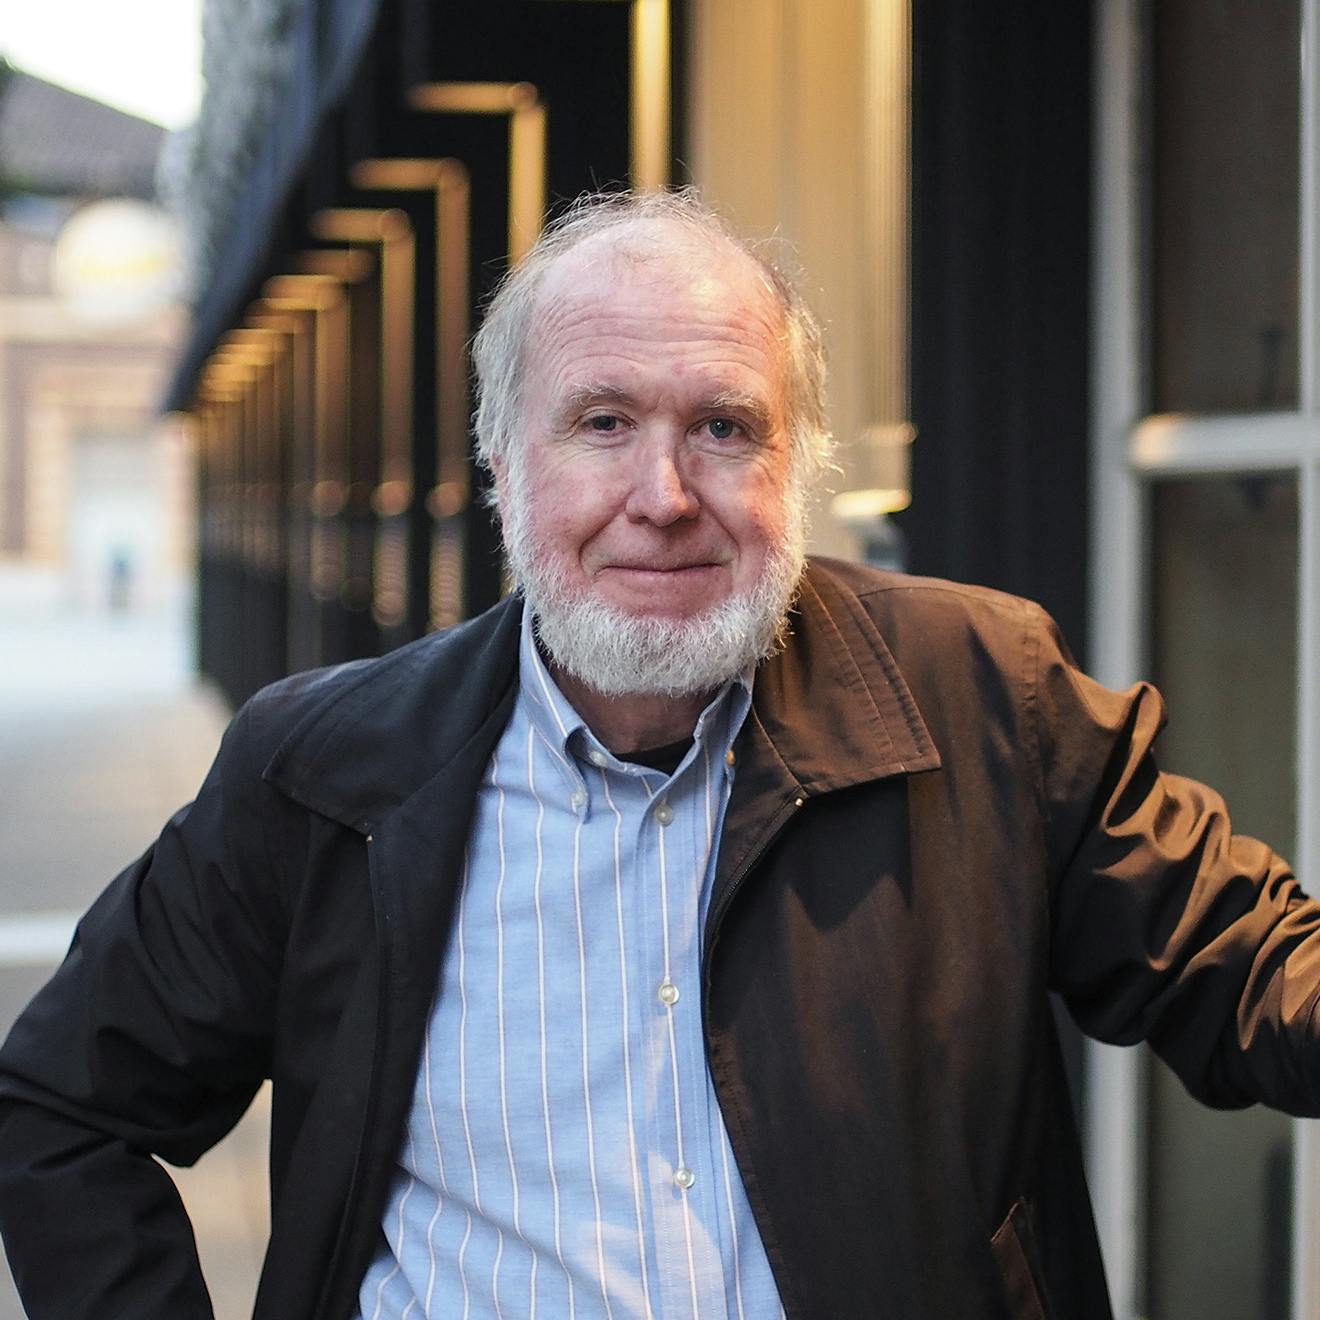 All-Time Top 10 Guests – #10 Kevin Kelly (On Technology’s Origins, What Technology Wants, and Advising Steven Speilberg on Minority Report)